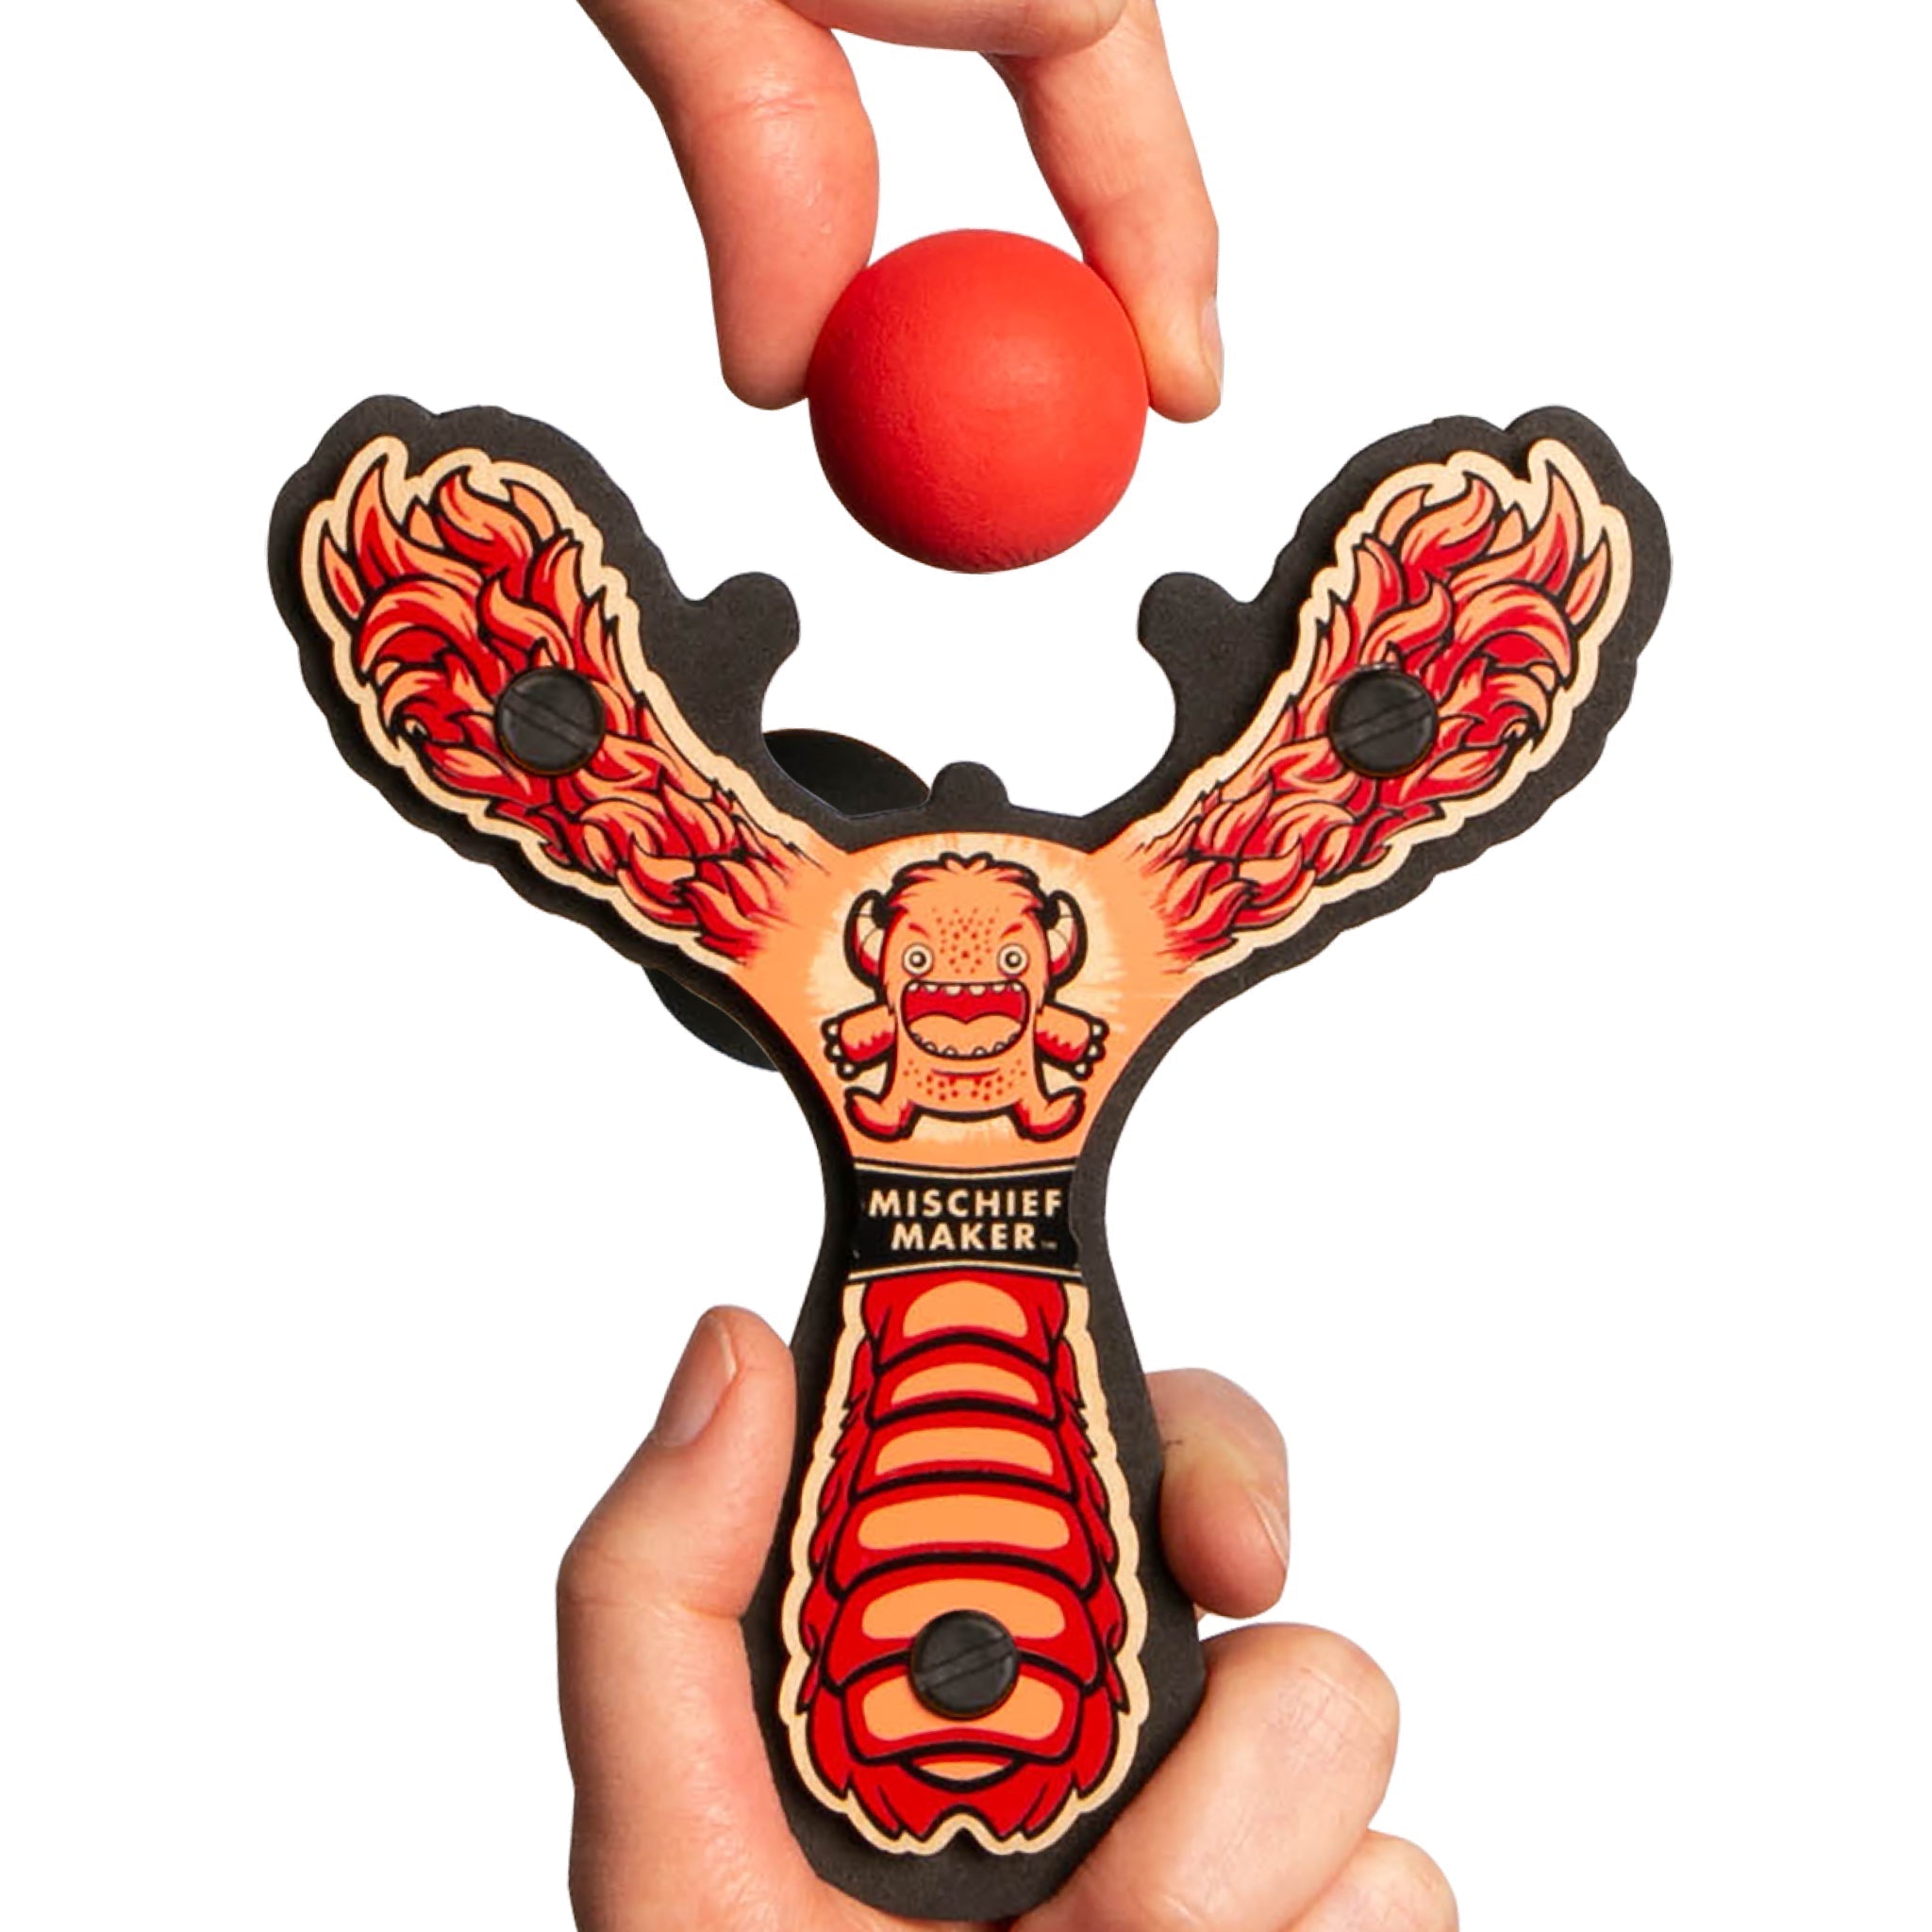 Red Monster toy slingshot being loaded with a soft foam ball. Mischief Maker by Mighty Fun!